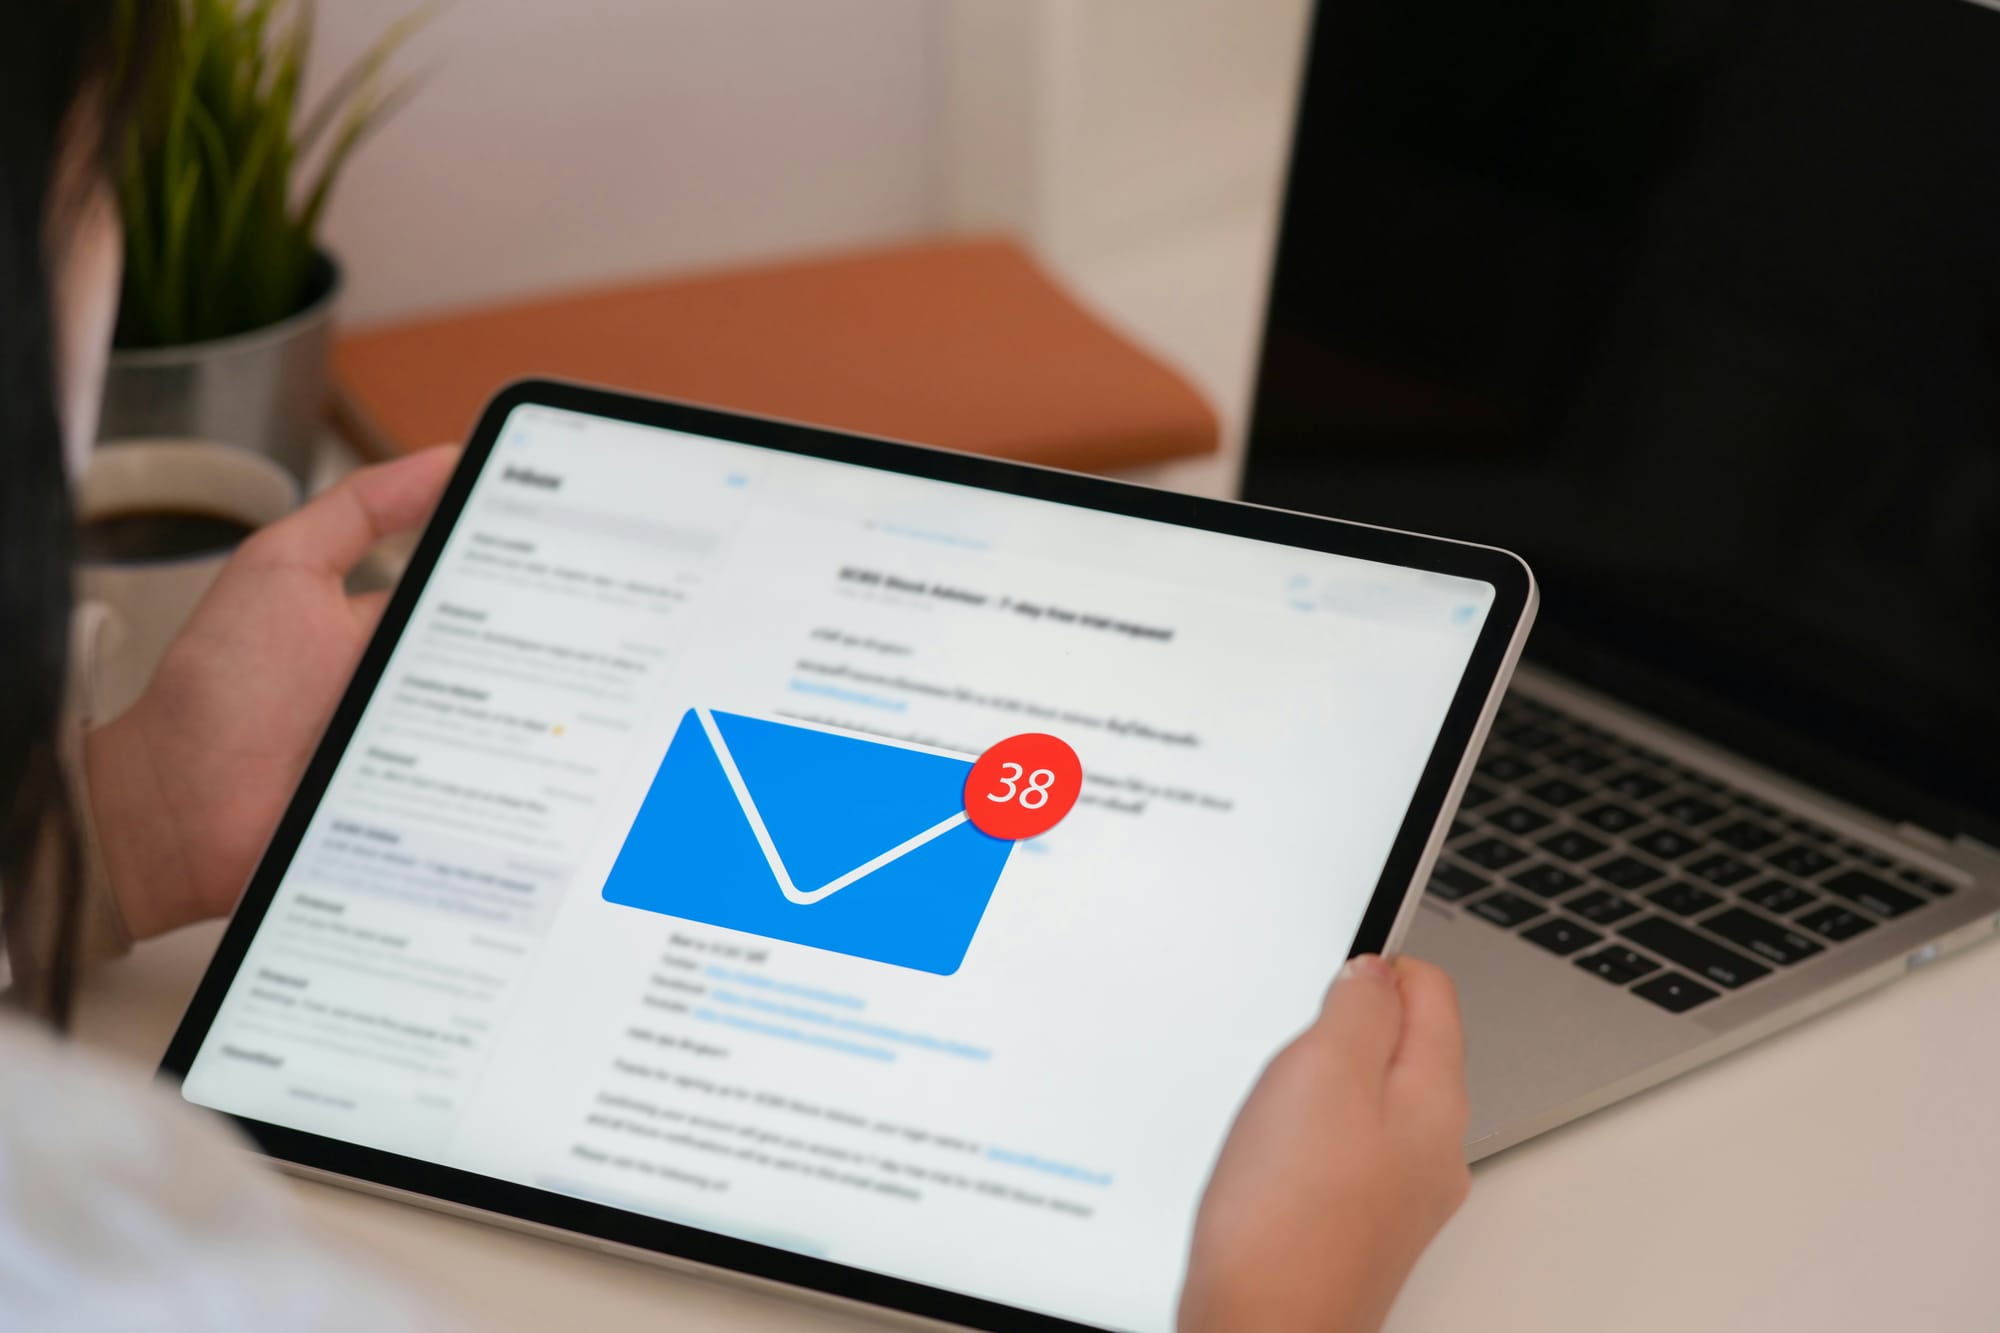 email notification on mailbox - cold email deliverability